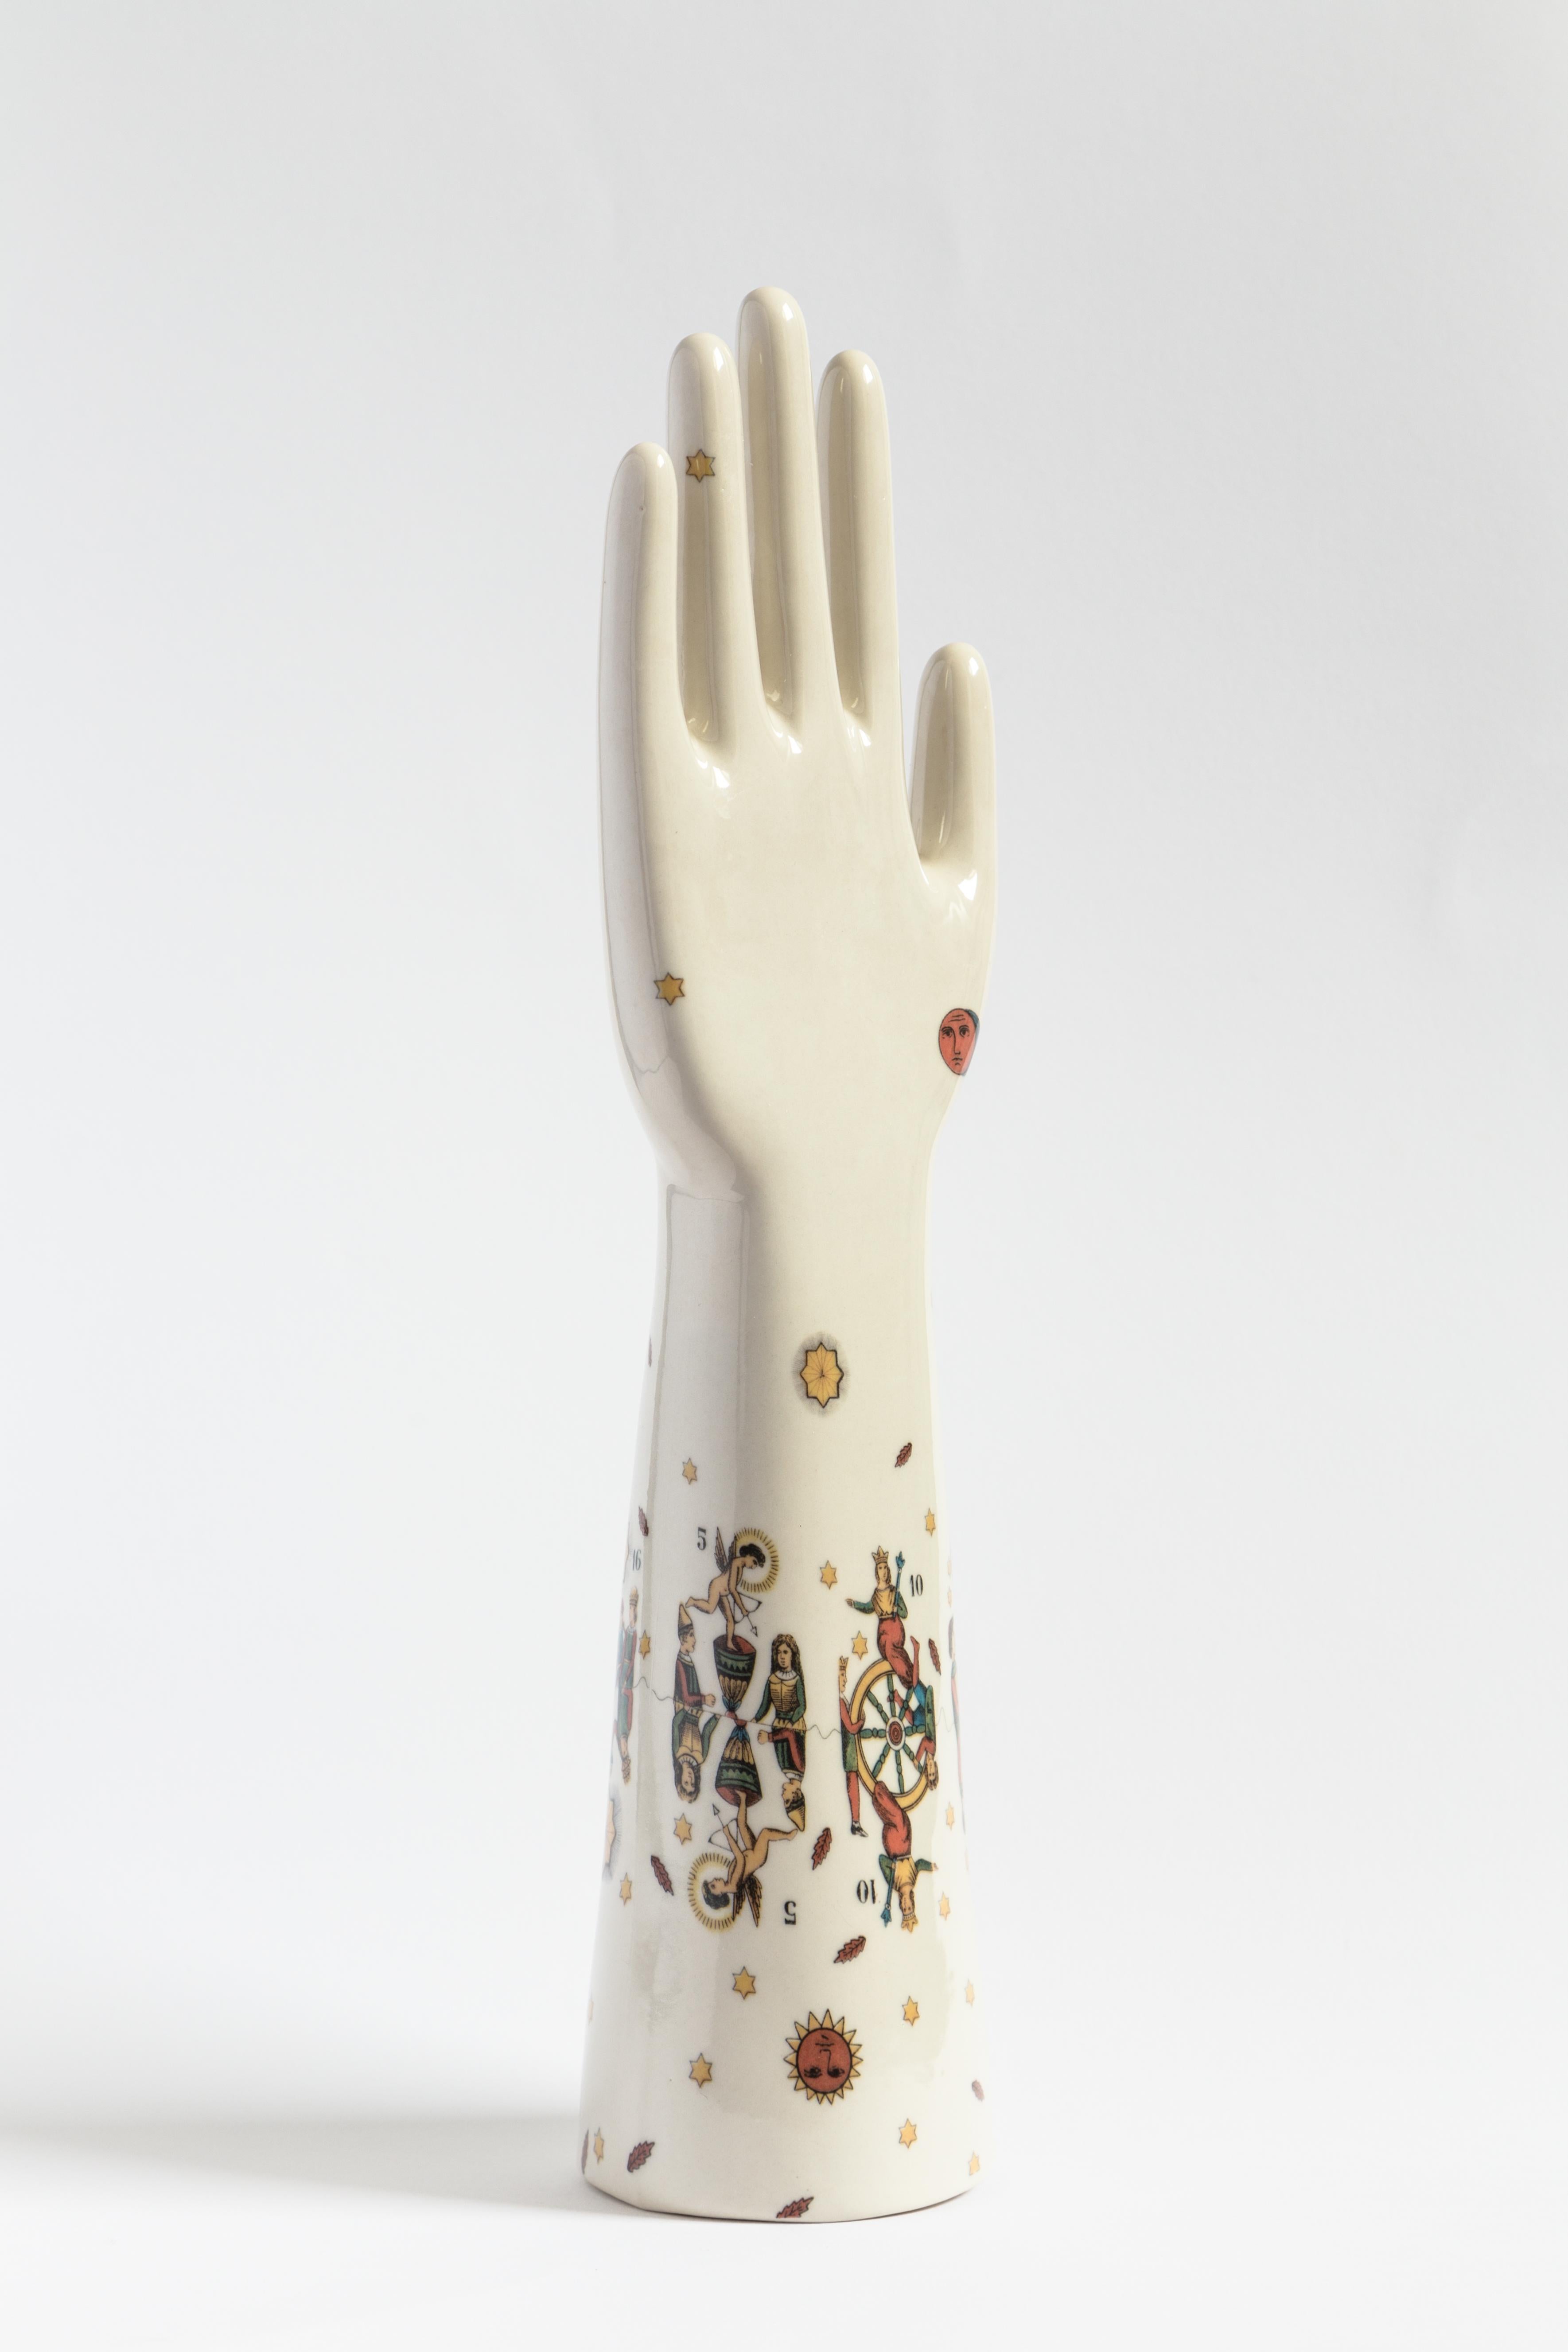 This striking sculpture is part of the Anatomica series by Vito Nesta, featuring decorative objects with simple and essential anatomical shapes characterized by bold, contrasting colors and modern flair. Made of Capodimonte porcelain with a glossy,